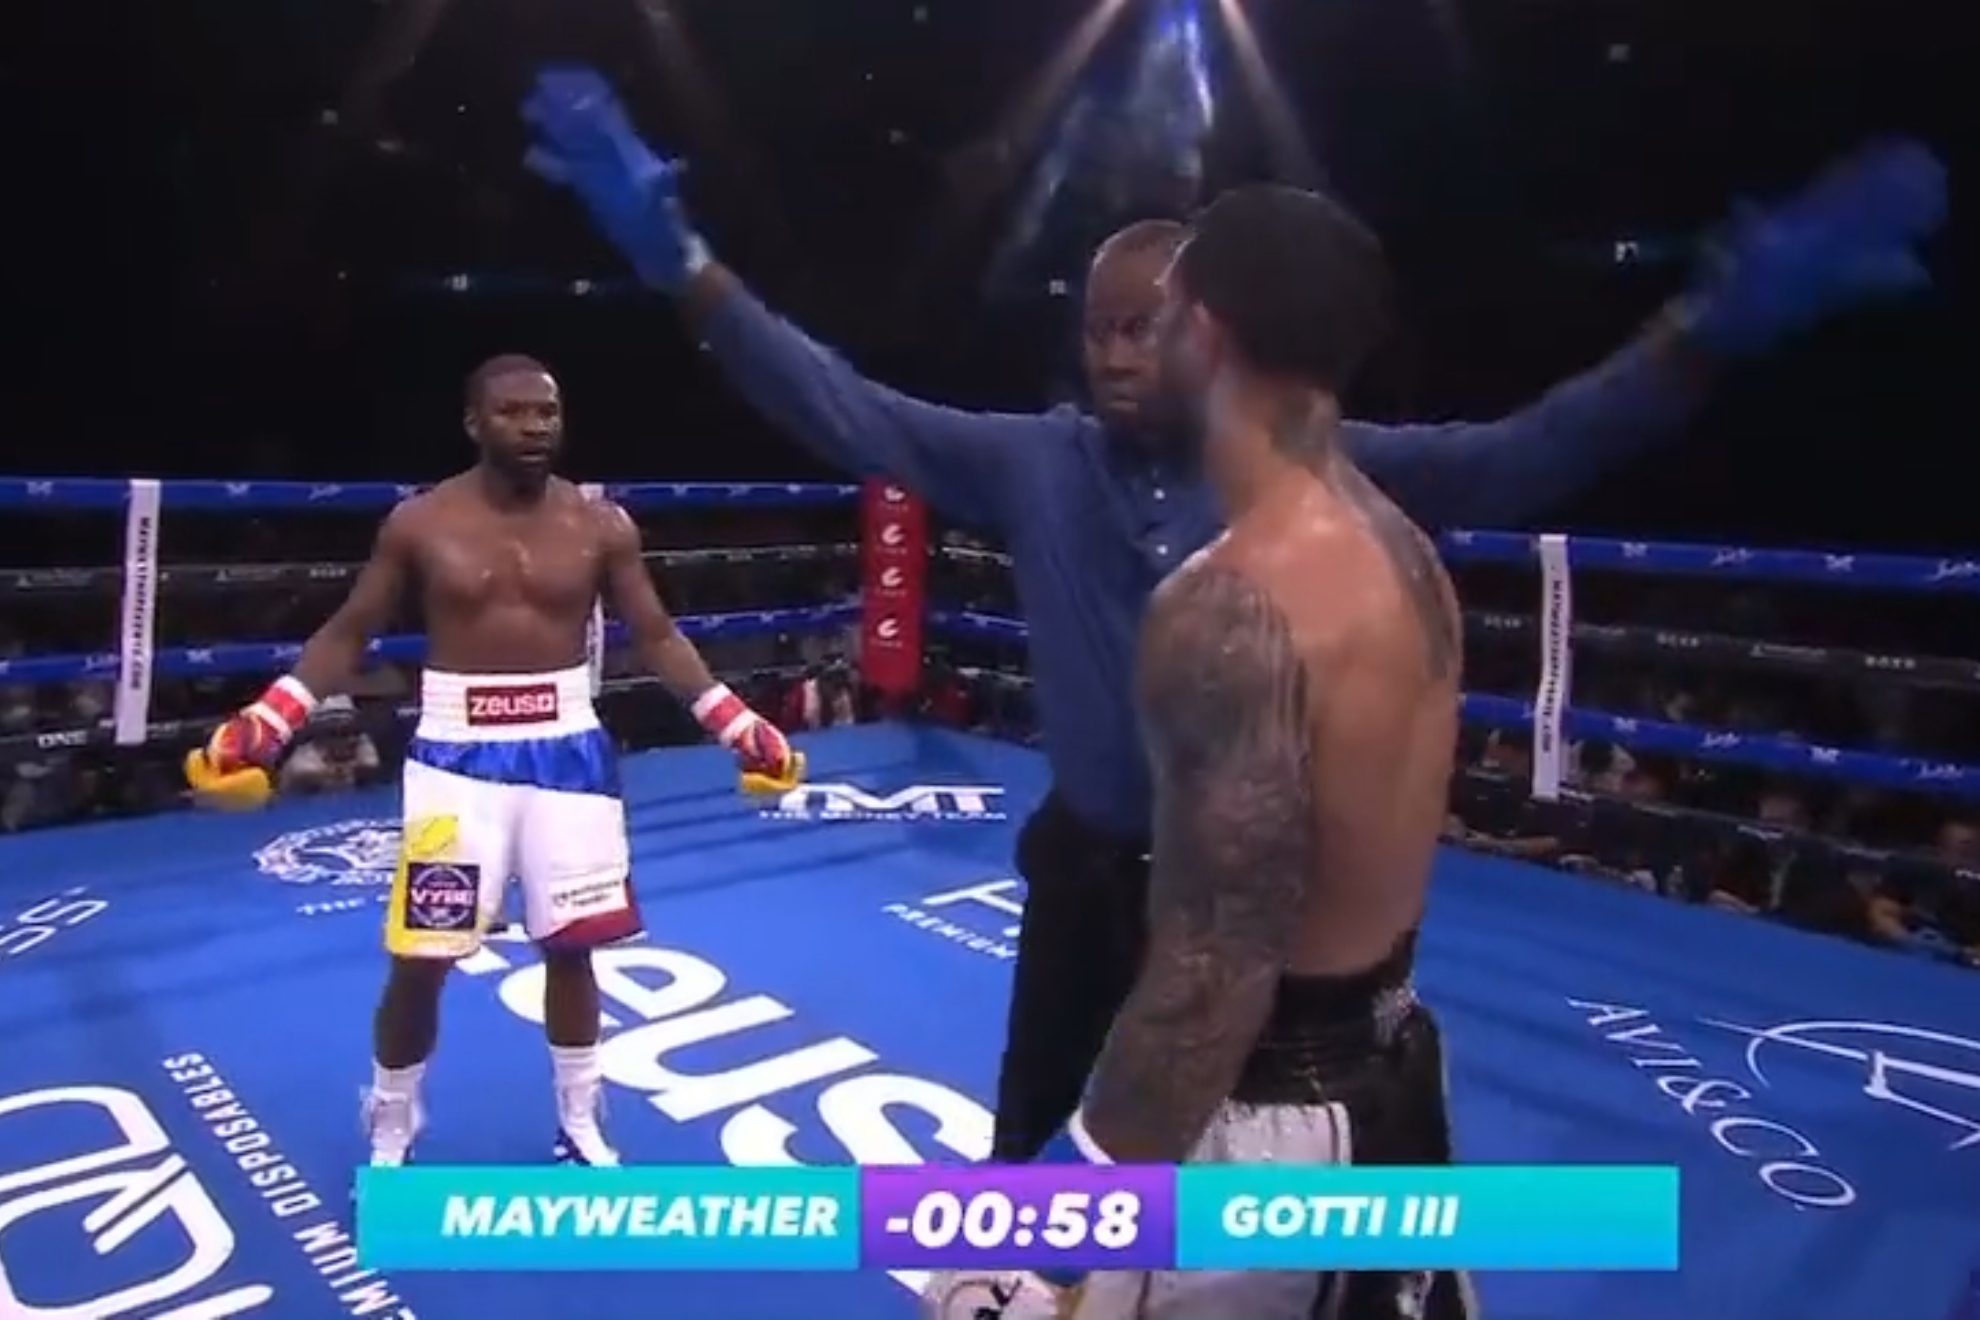 Fallout from Mayweather-Gotti III exhibition match: Brawl erupts and sinister mesages surface